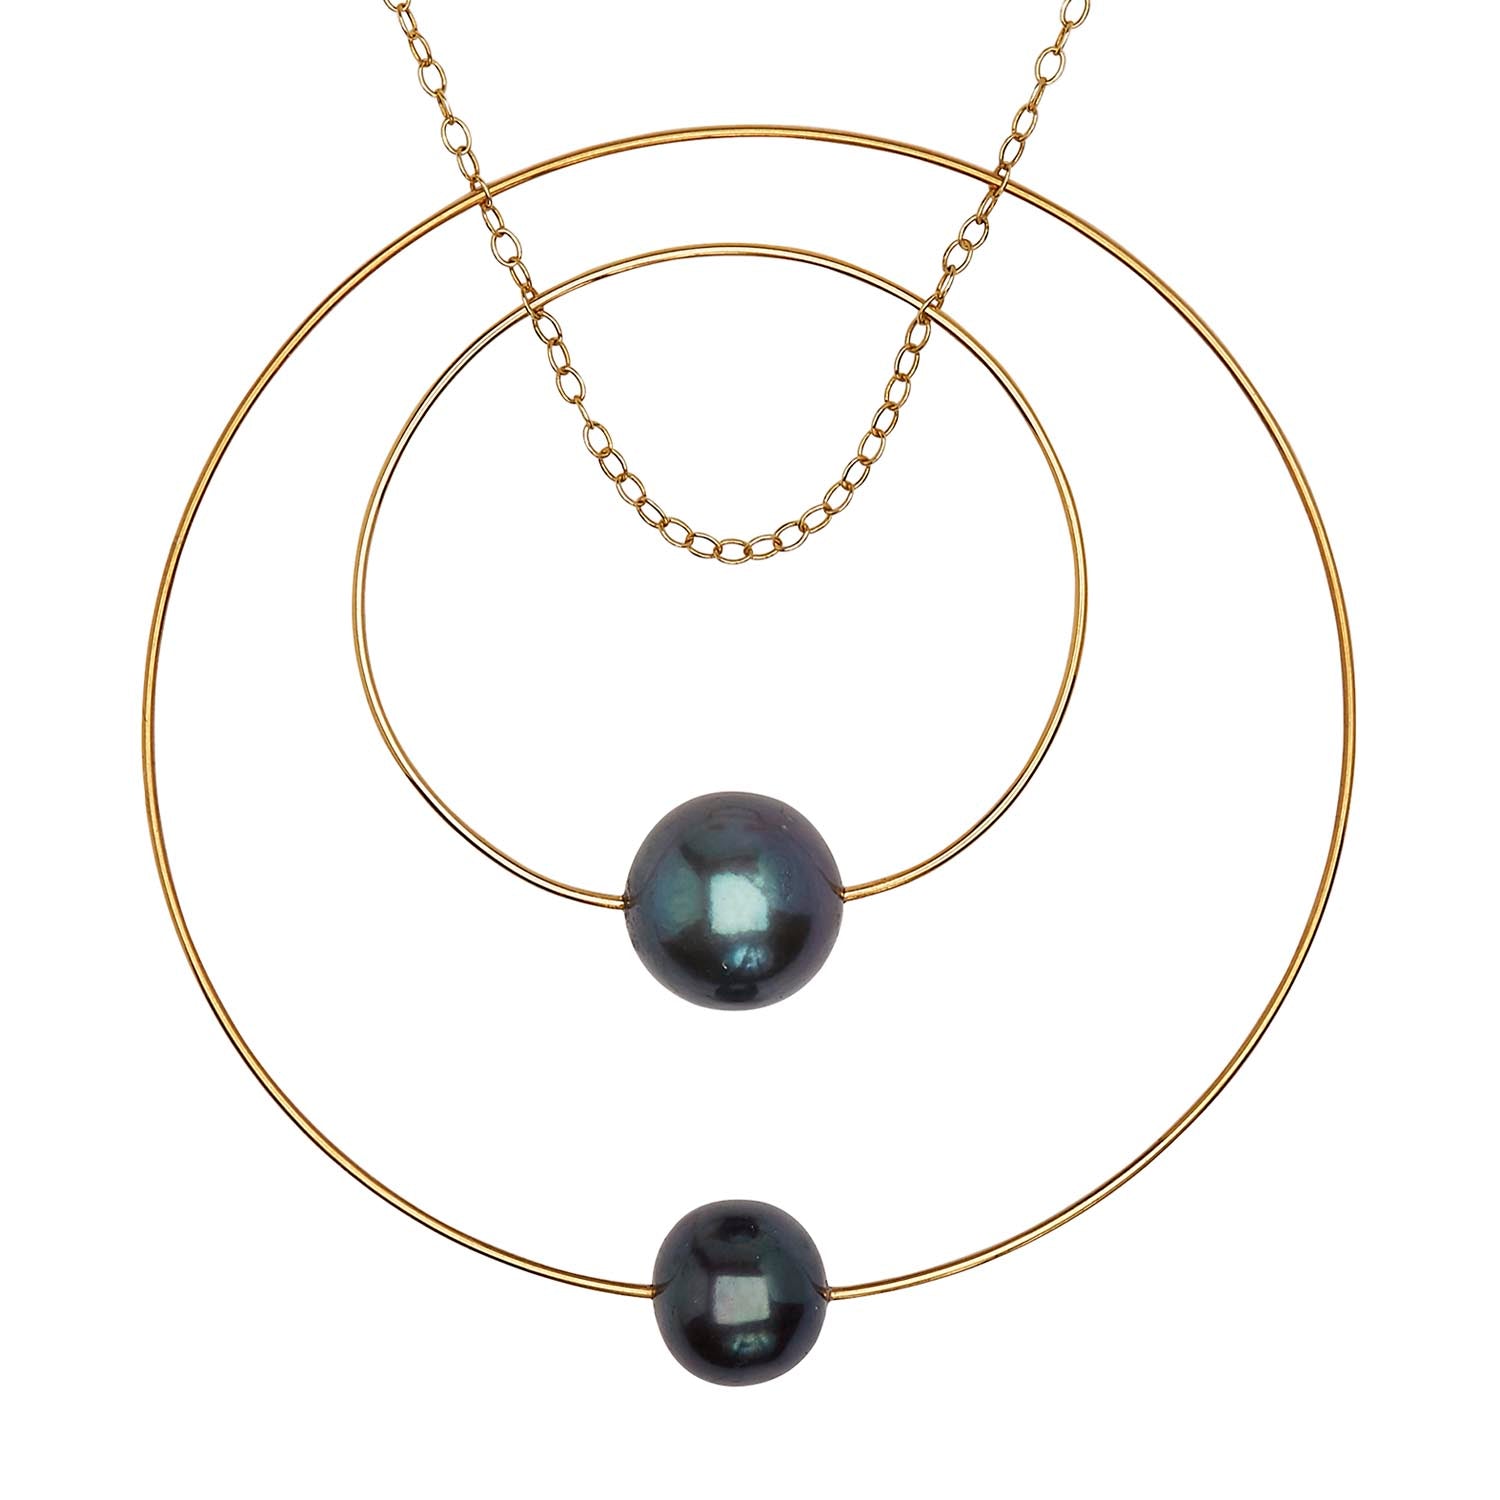 Double Circle Pendant Necklace with Peacock Pearls